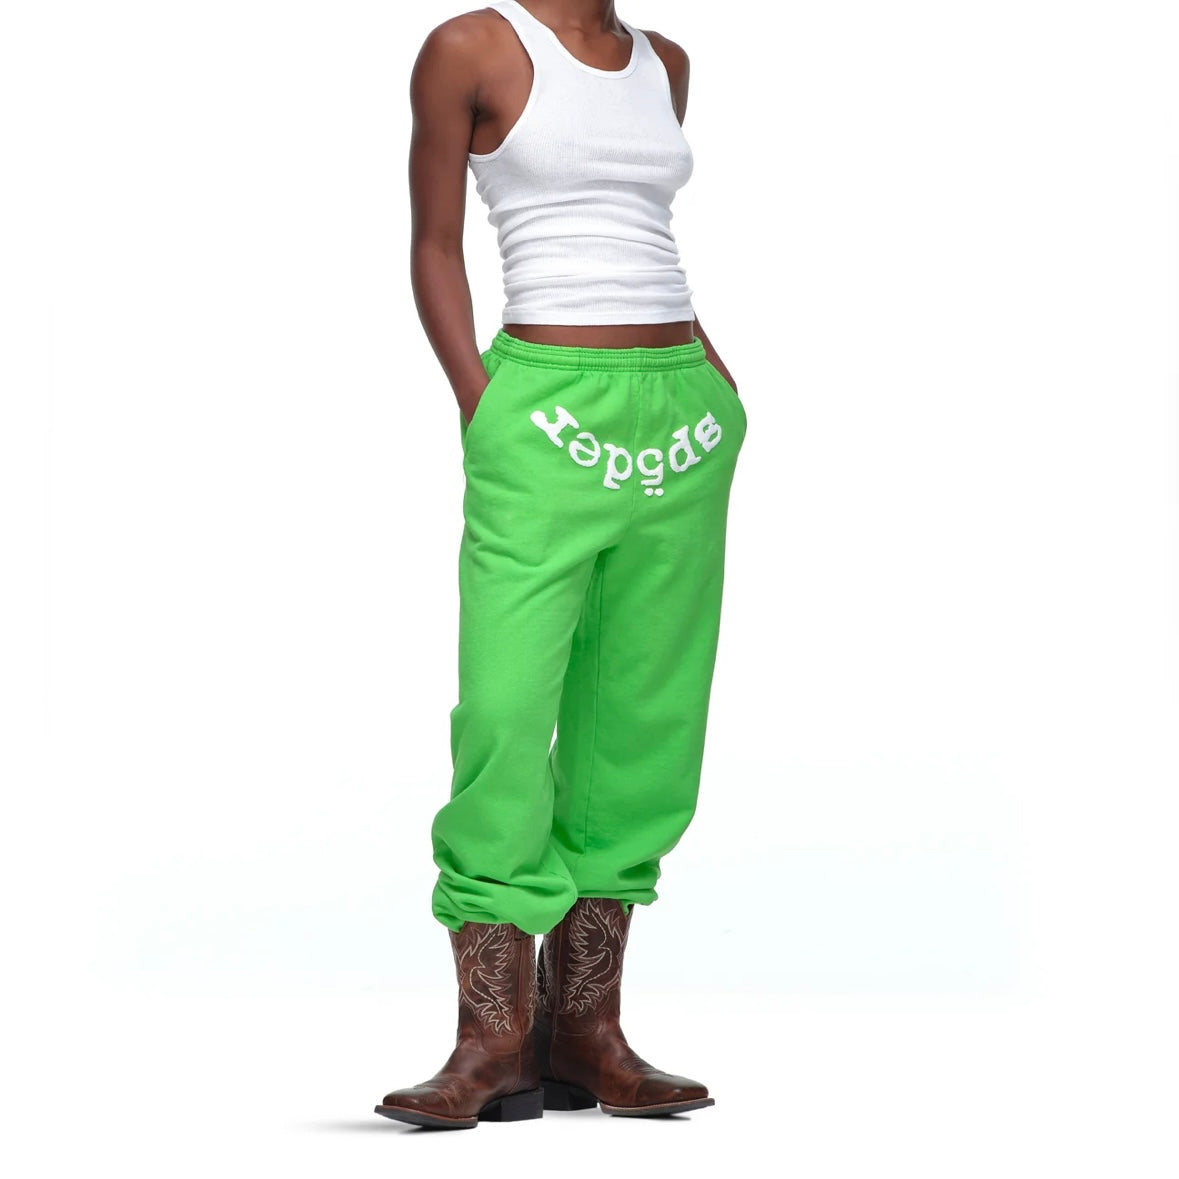 Sp5der Green White Legacy Sweatpants On Body Front Female